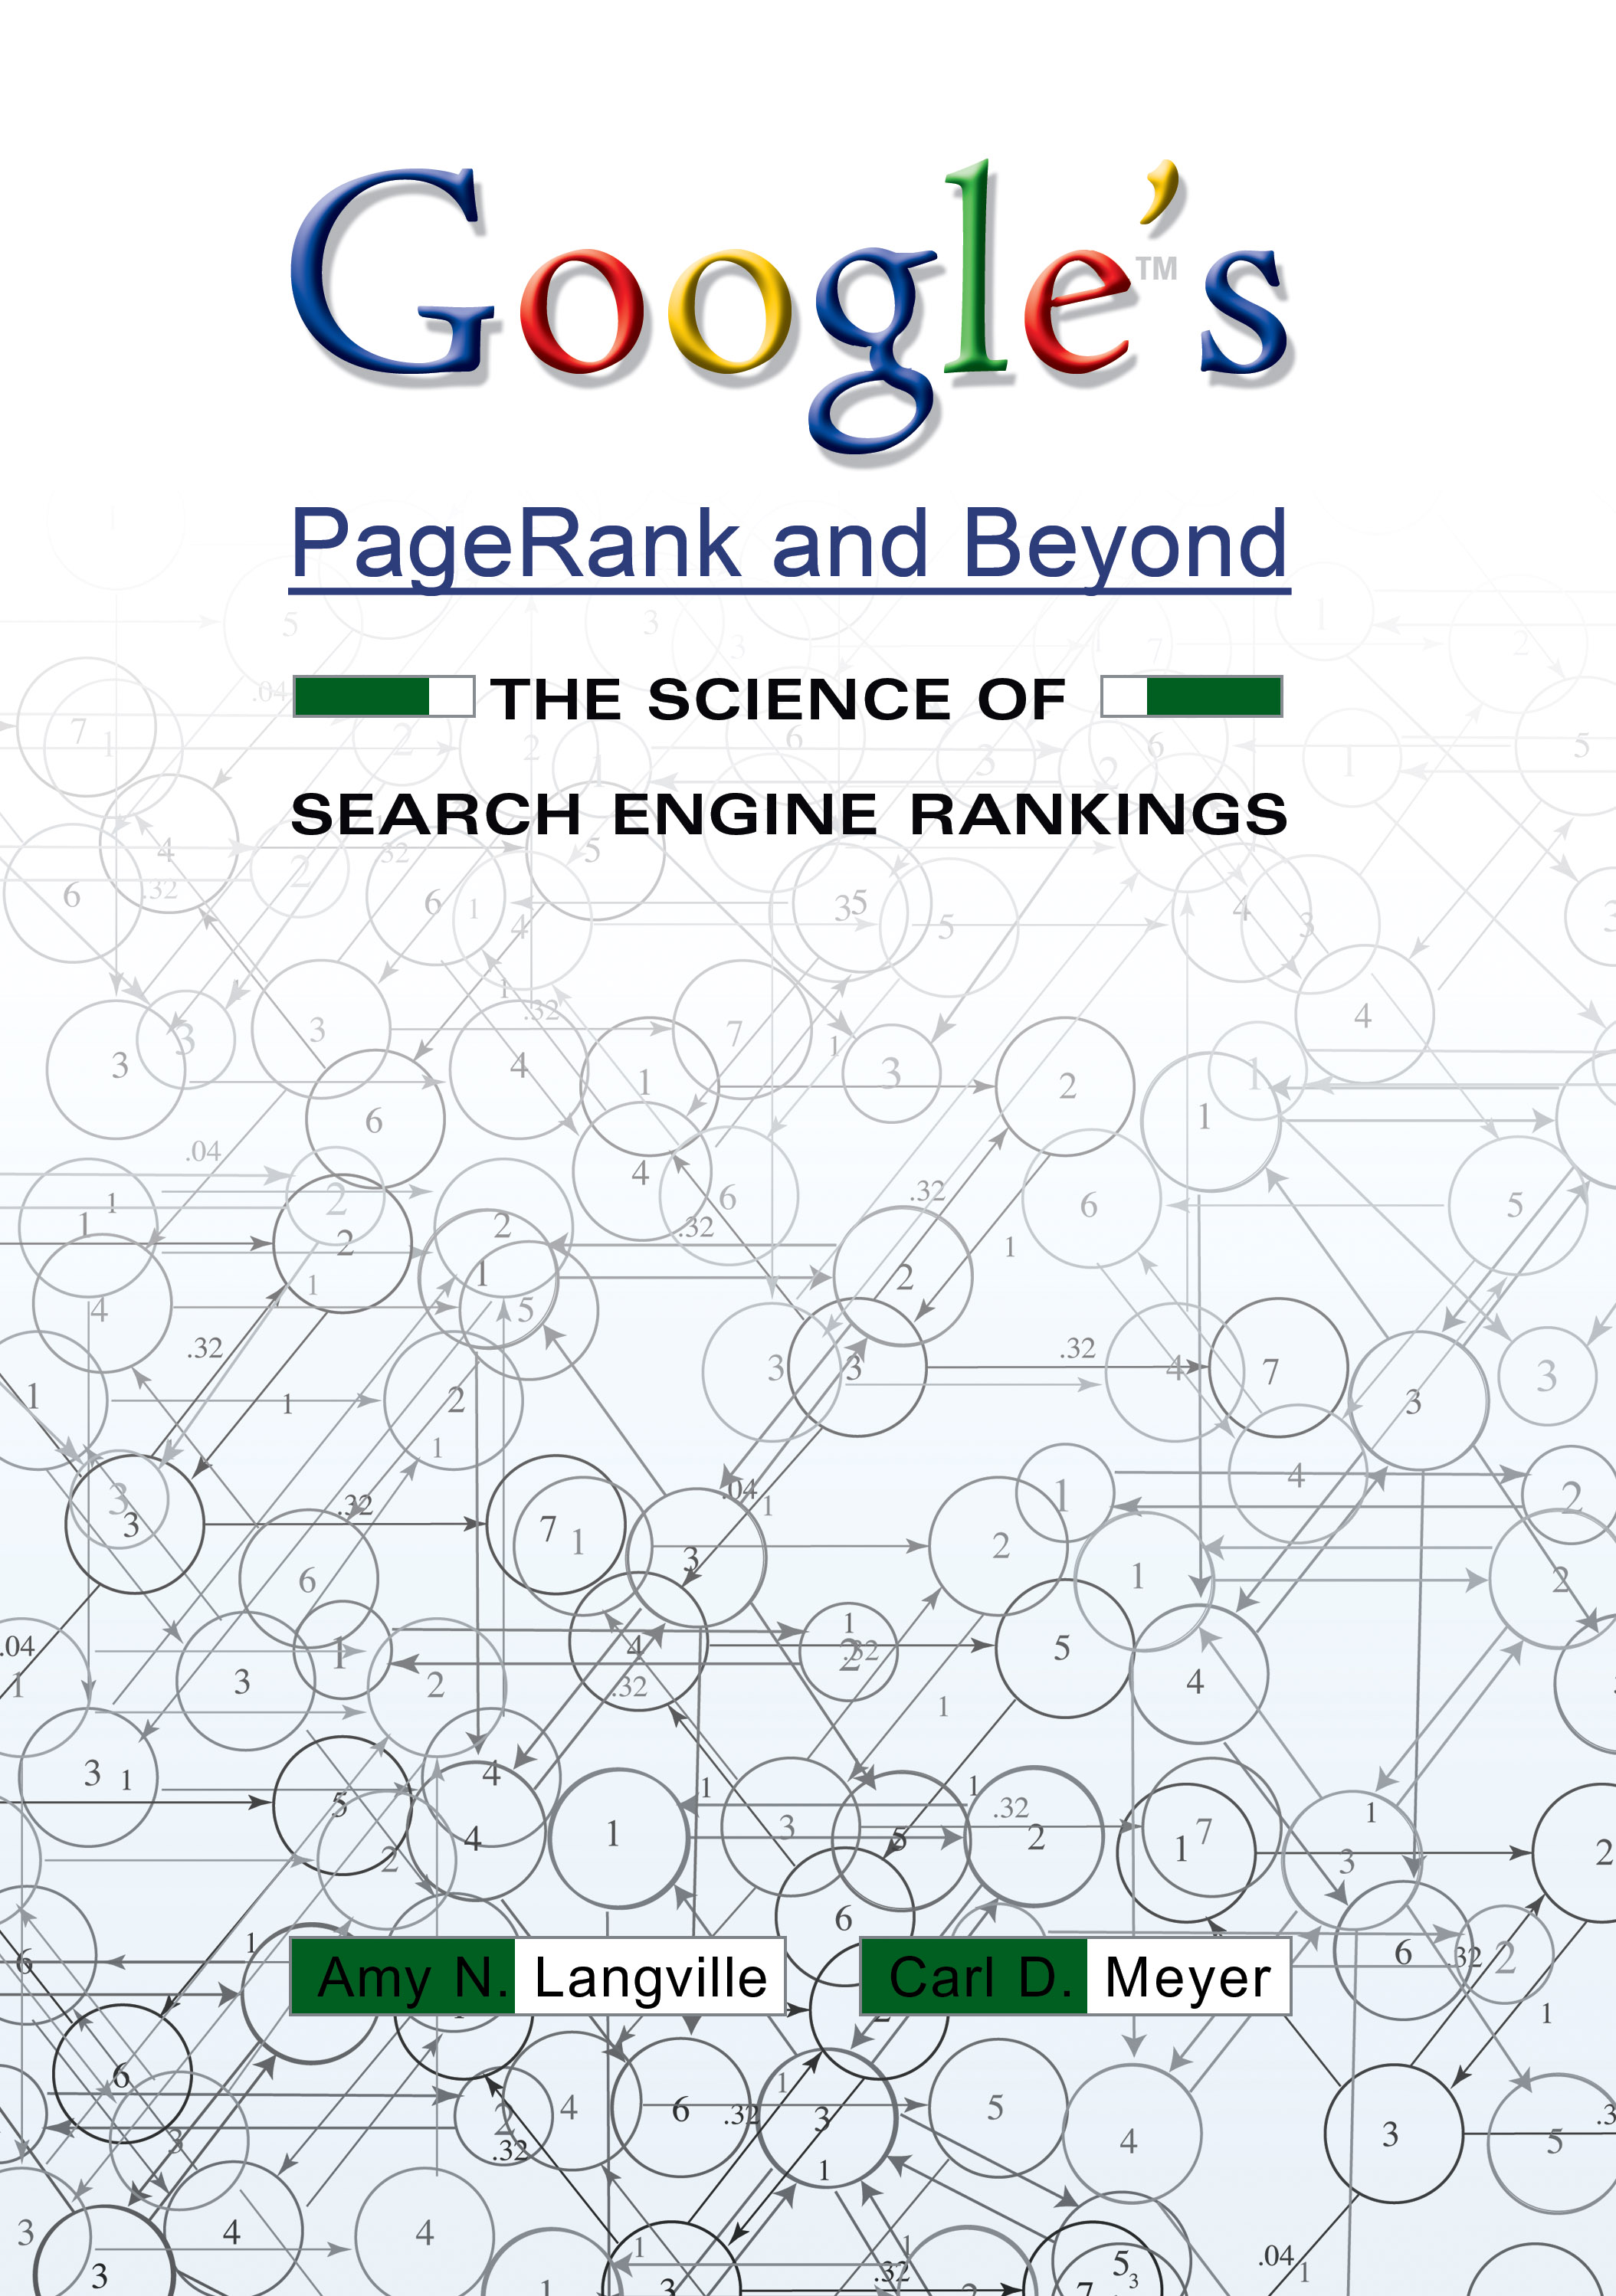 Google's PageRank and Beyond - 25-49.99